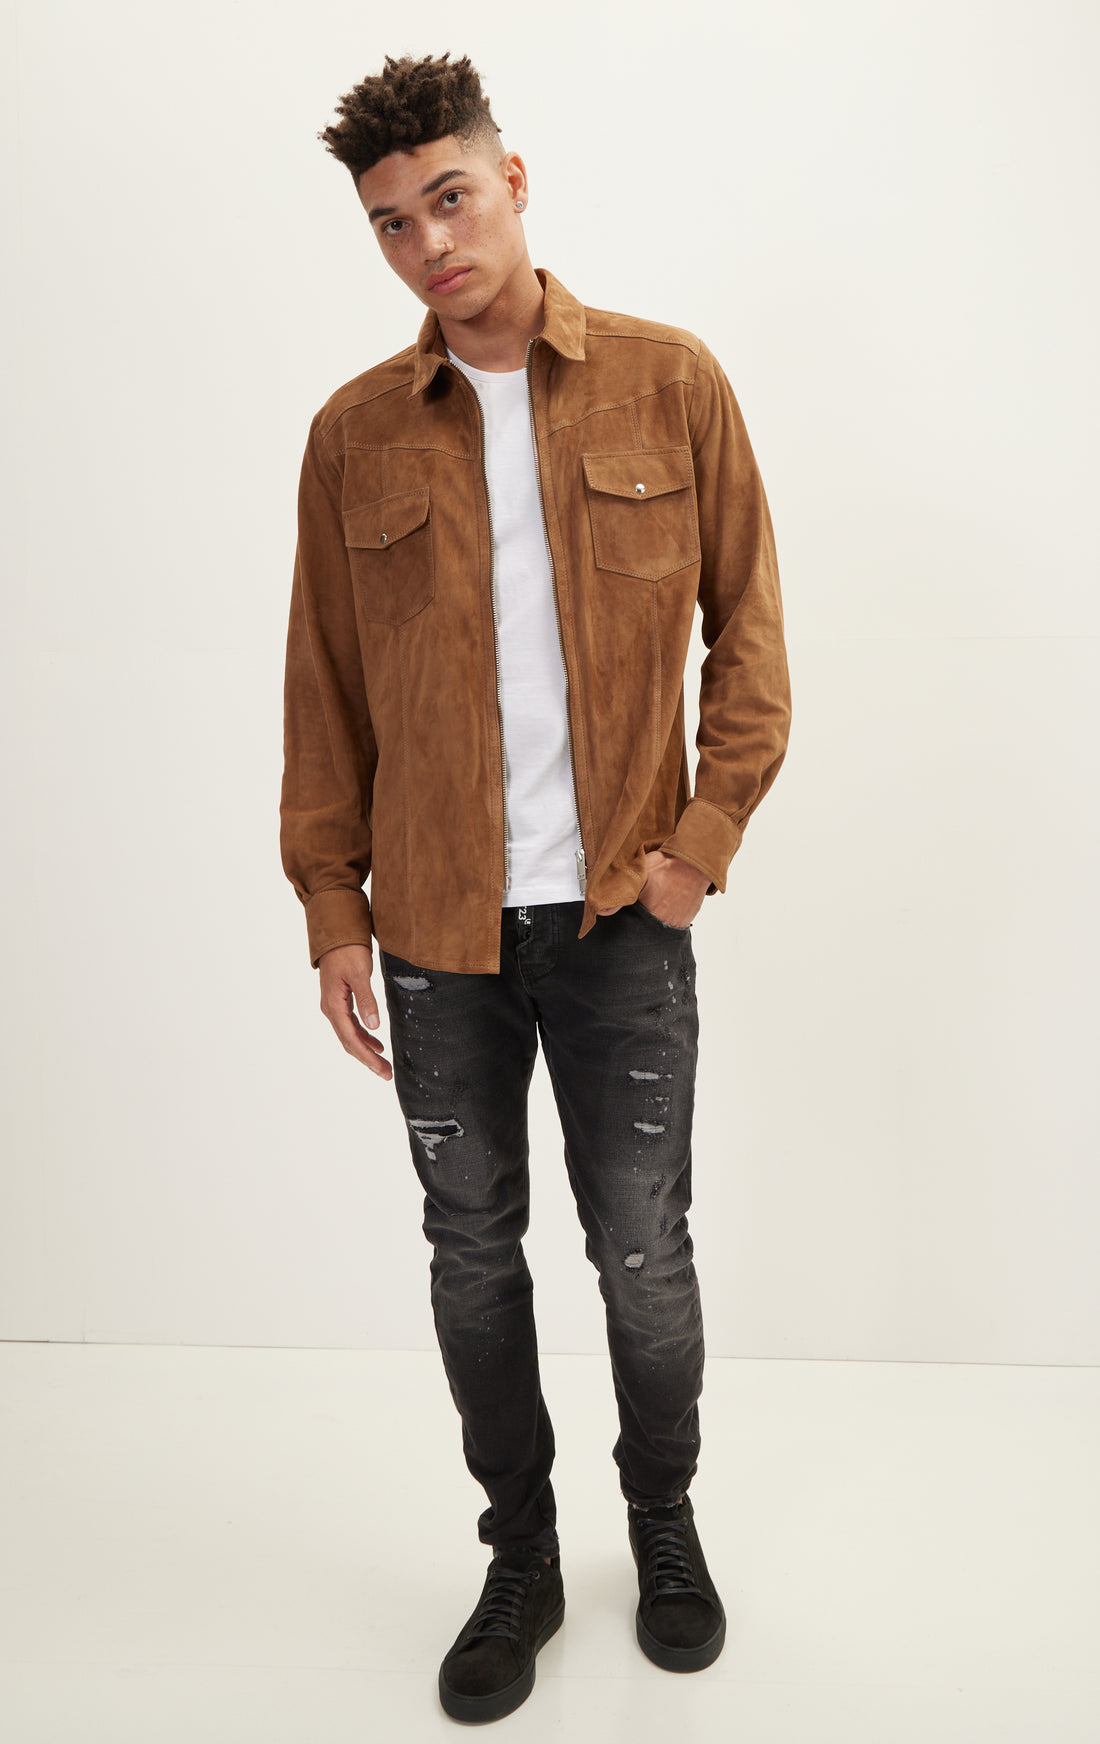 N° 71361 SUEDE LEATHER SHIRT- CAMEL